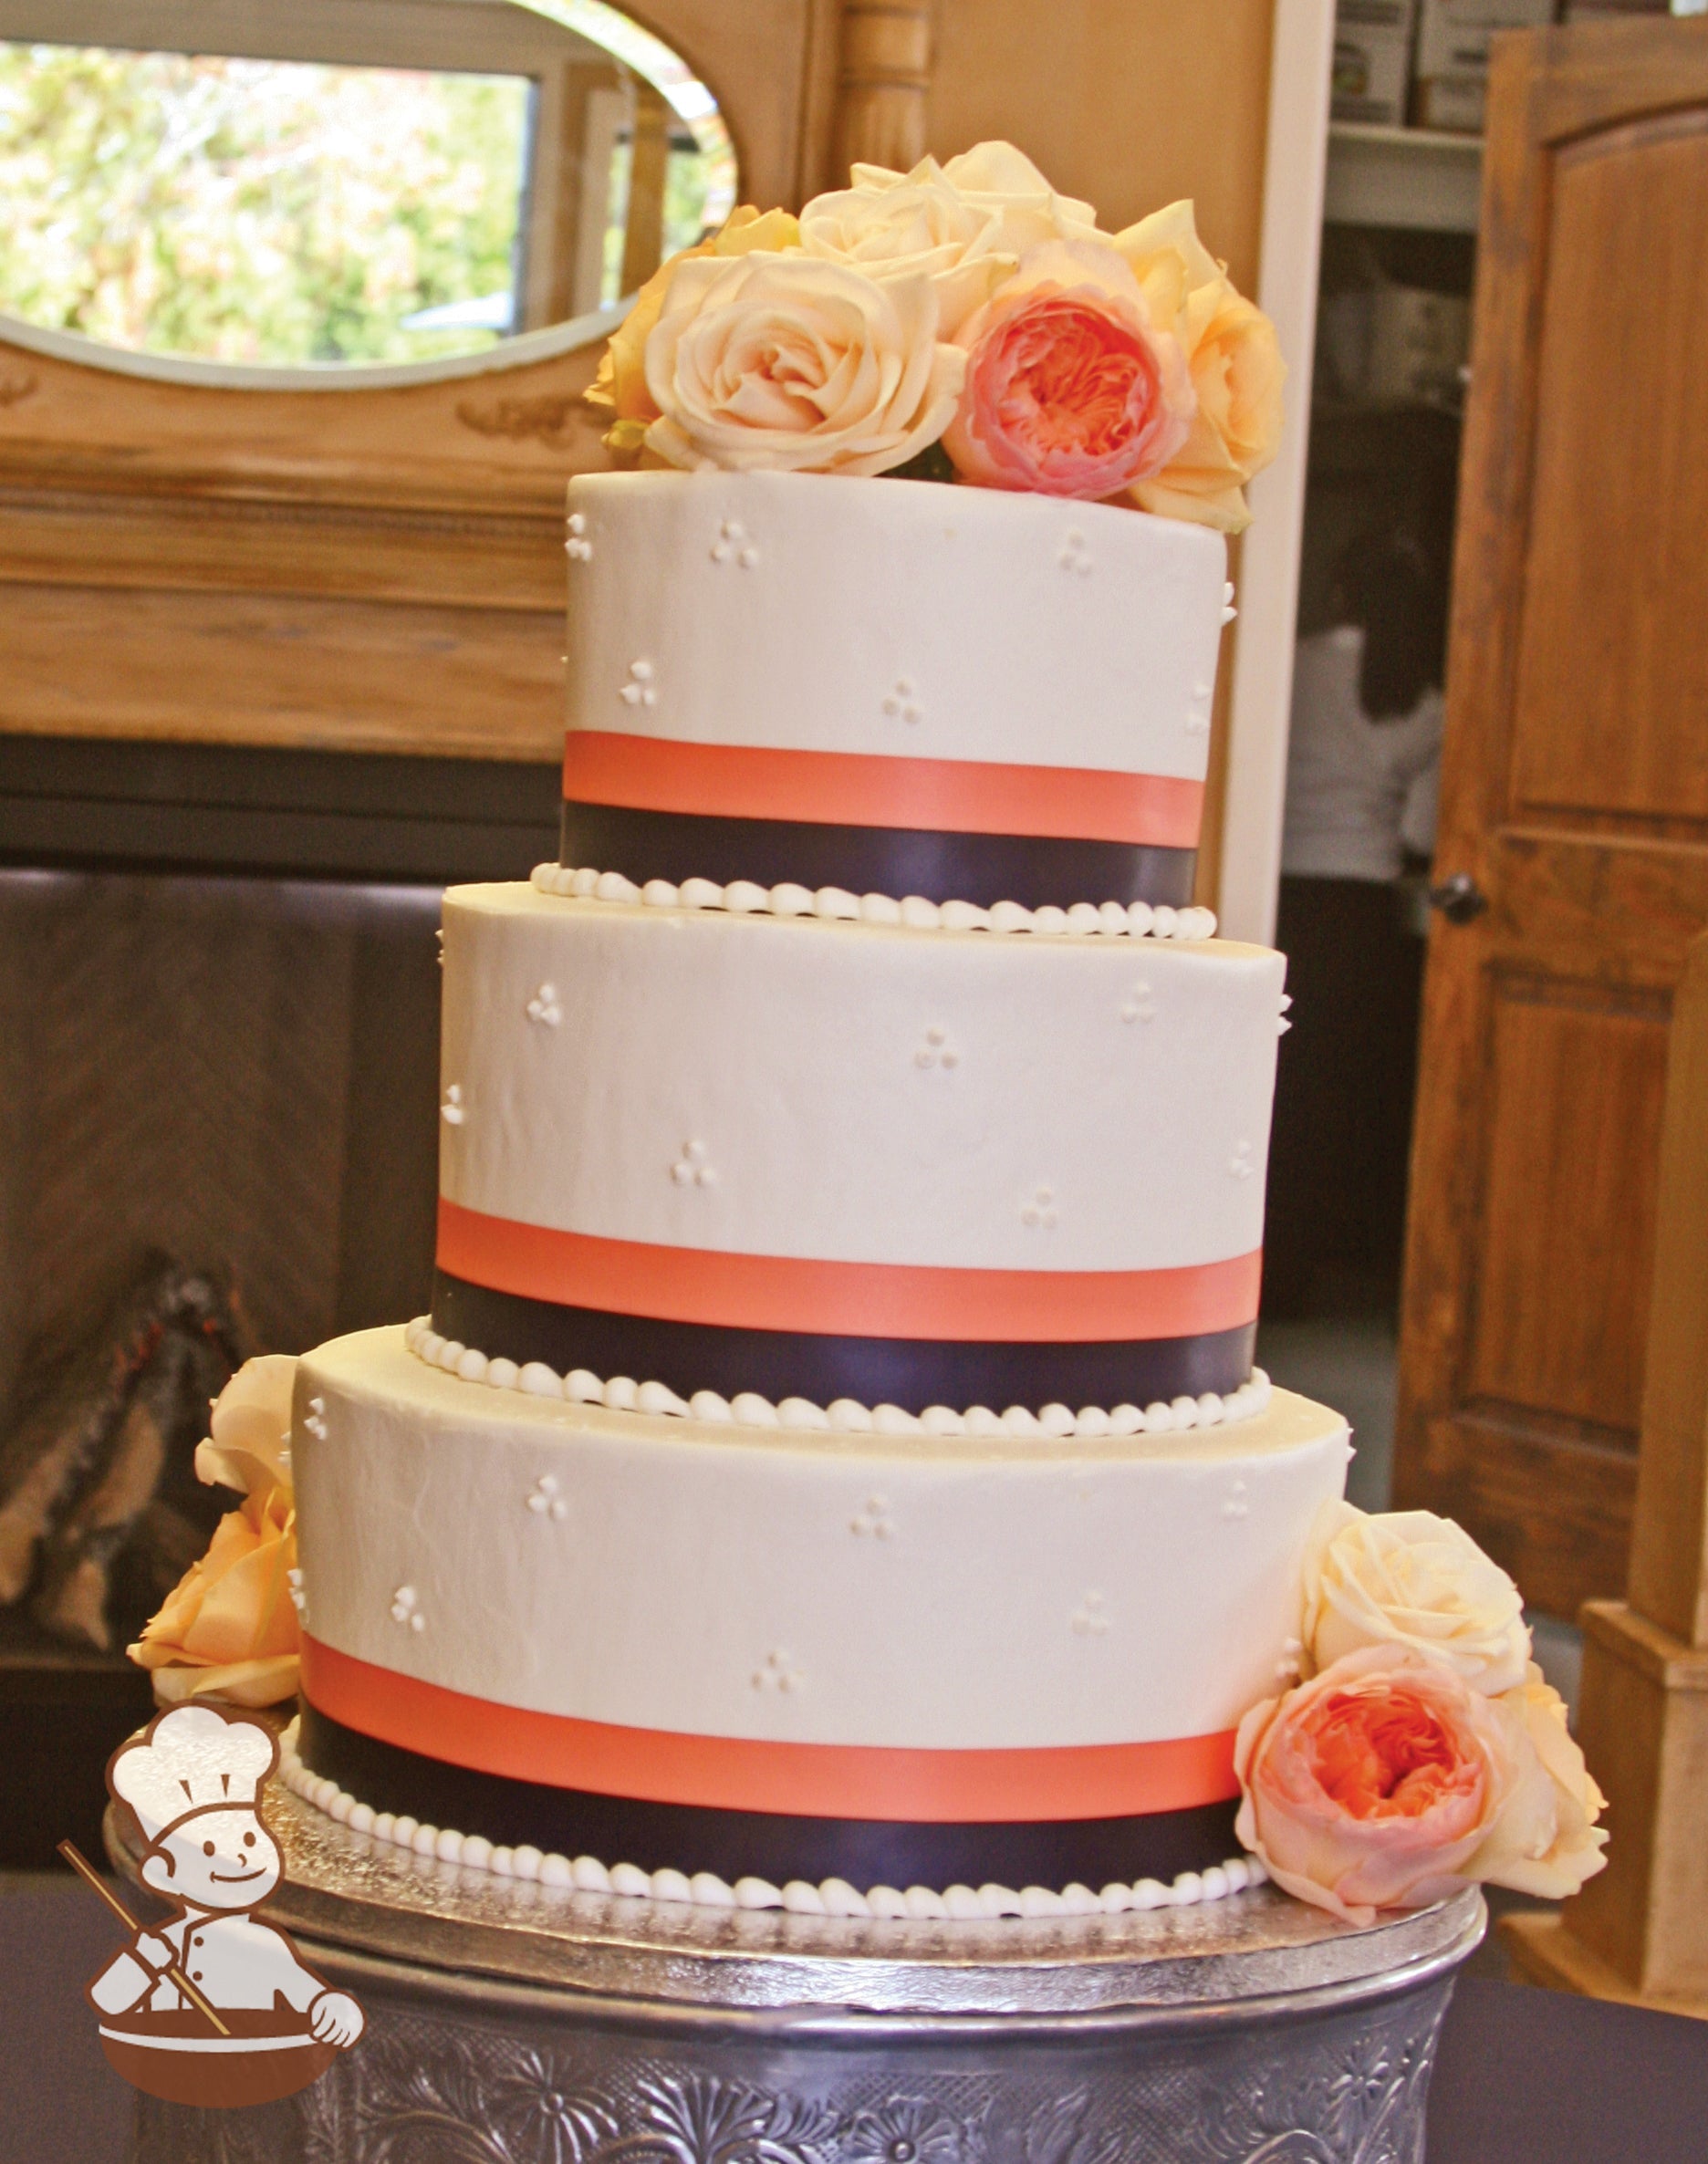 3-tier cake with smooth white icing and decorated with white buttercream tridot piping's and a double layer satin ribbon on base of each tier.